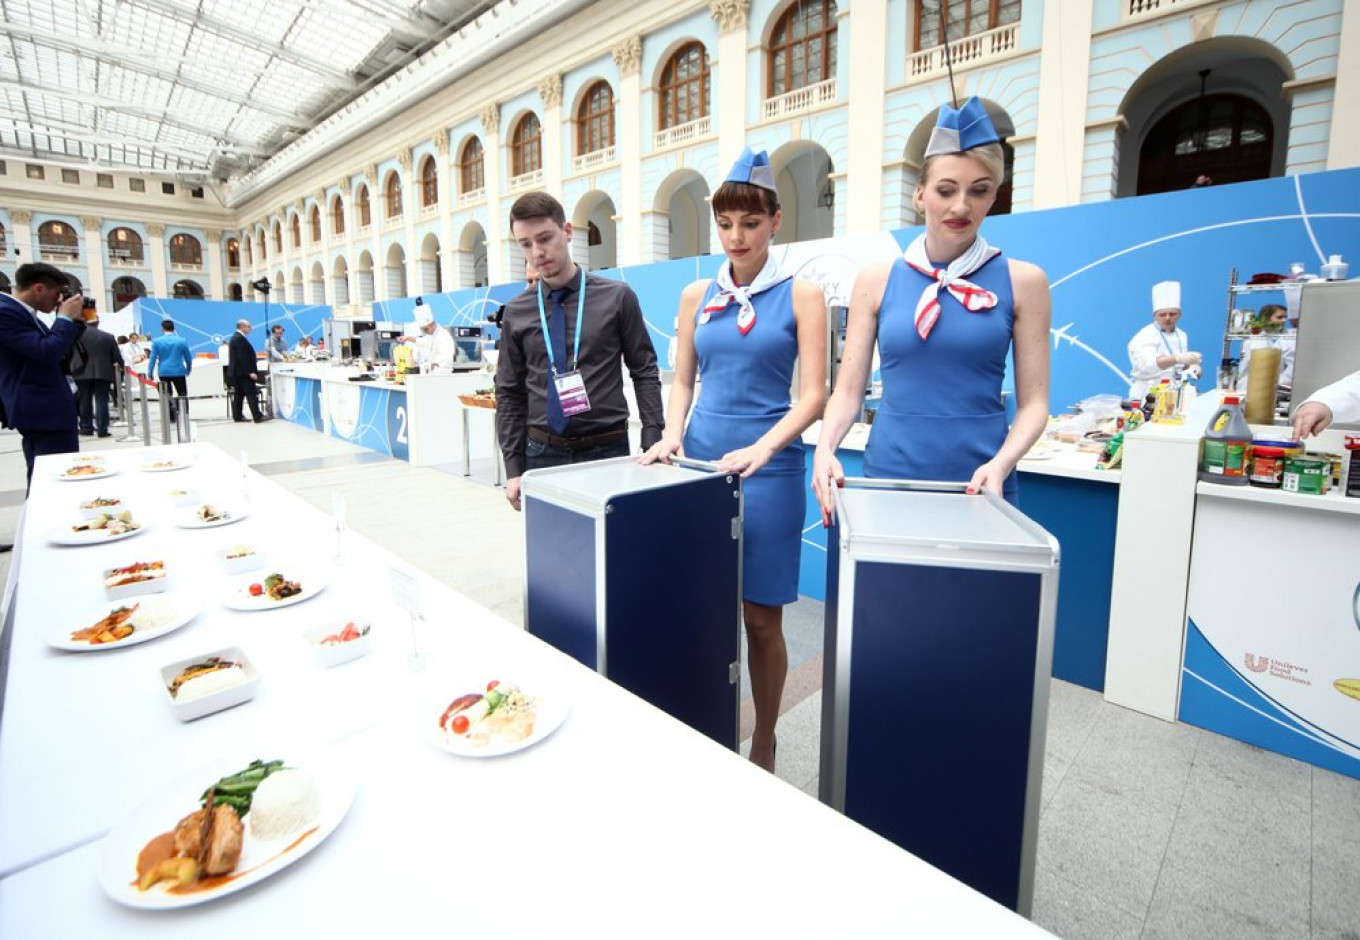 
					Russian airline catering company Aeromar organizes the event every year.					 					Sergei Vedyashkin / Moskva News Agency				